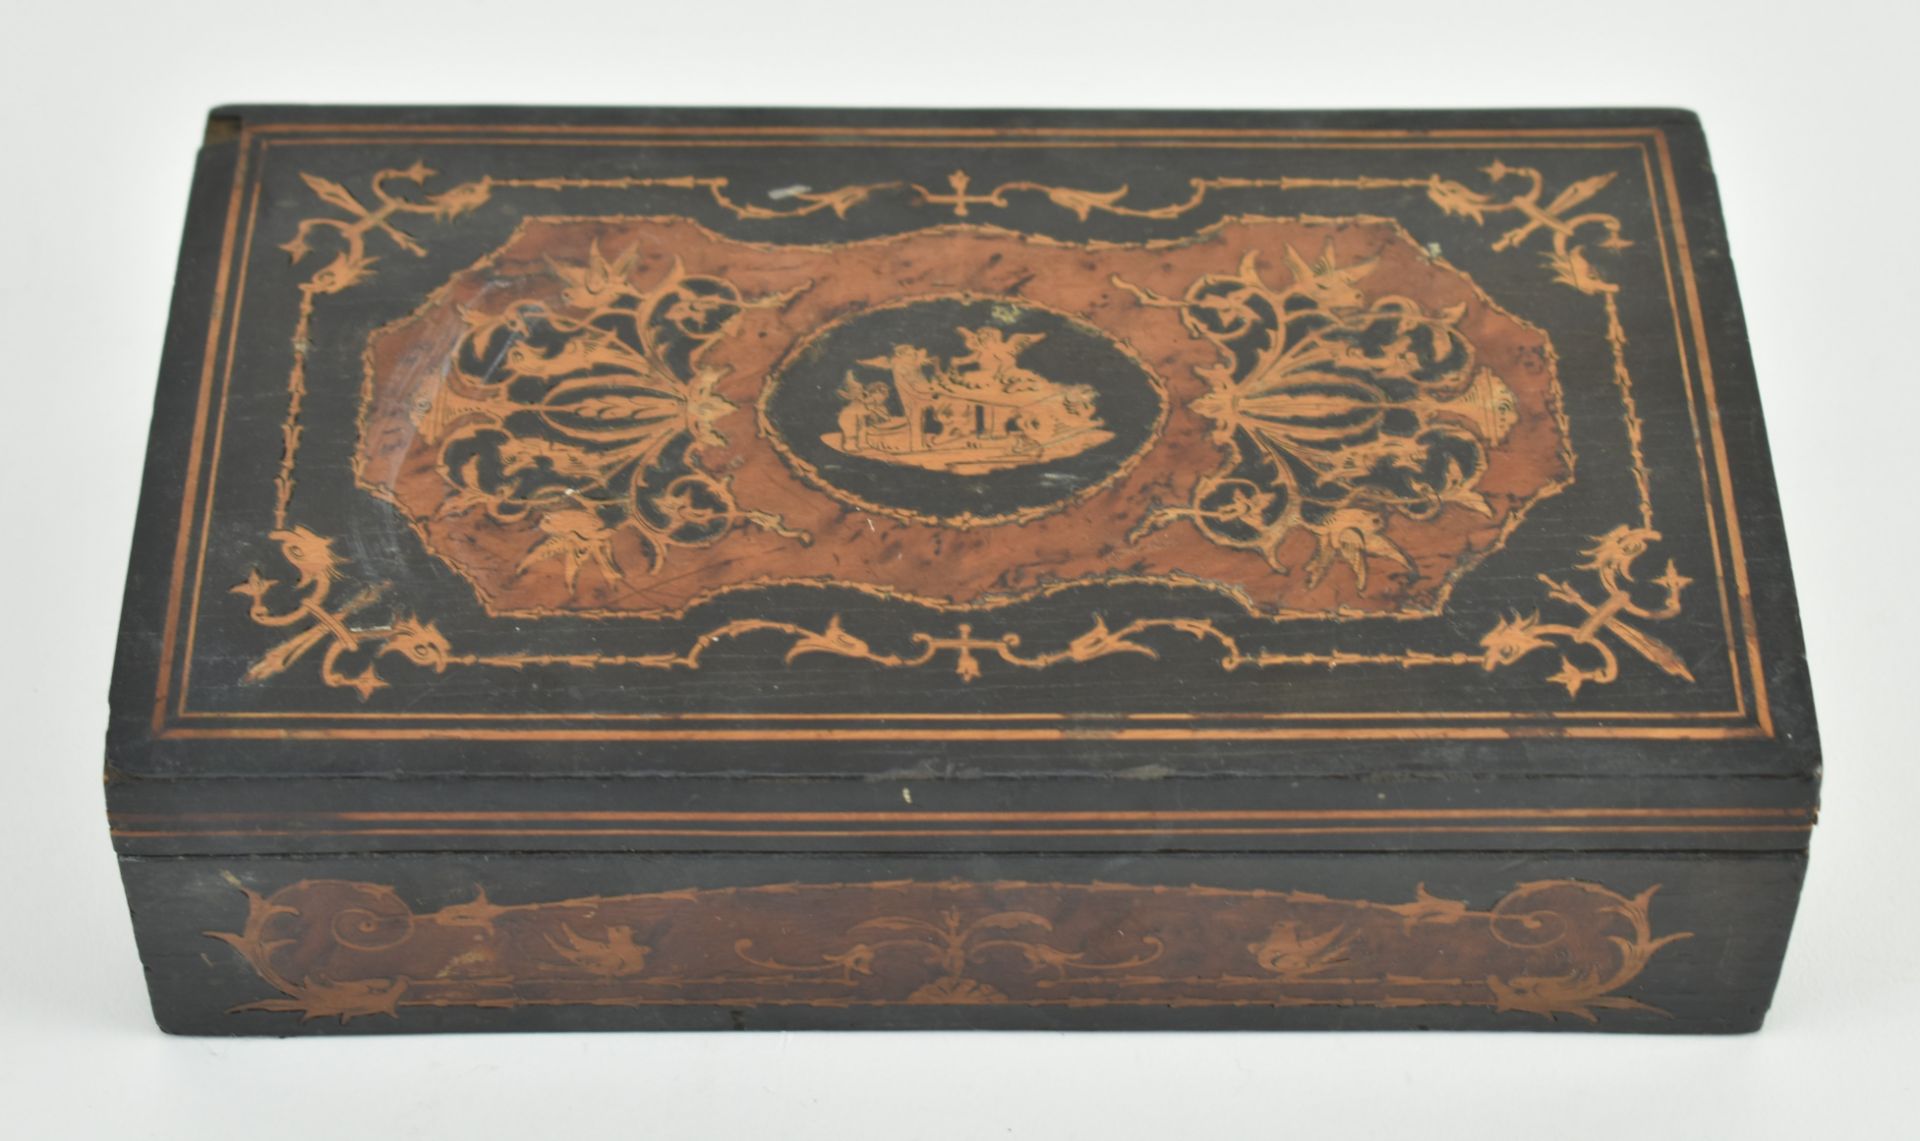 20TH CENTURY EUROPEAN MARQUETRY INLAID WOODEN JEWELRY BOX - Image 2 of 7